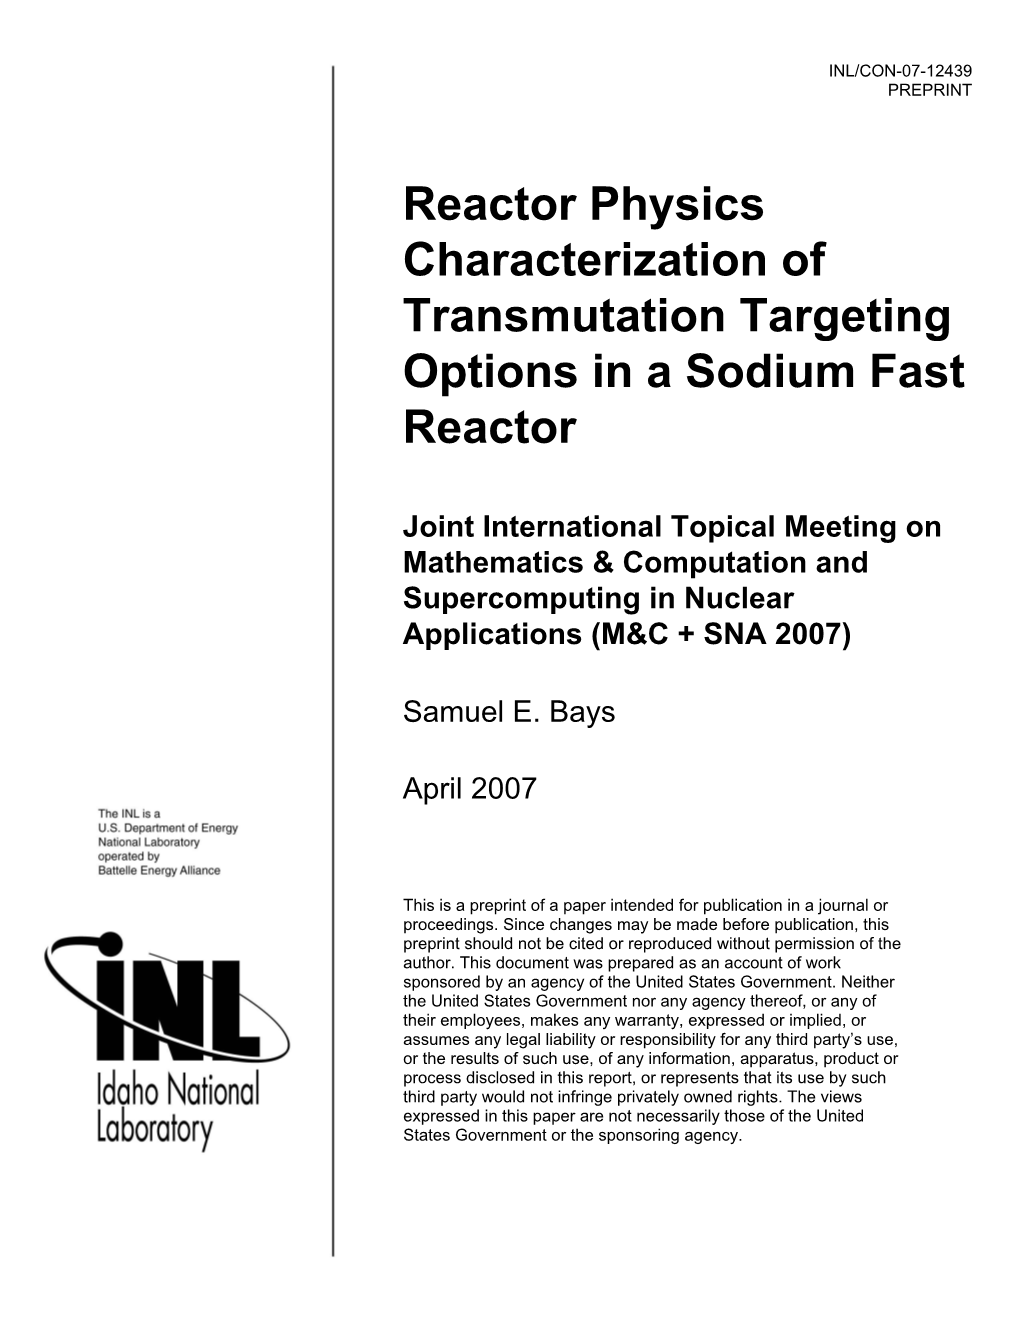 Reactor Physics Characterization of Transmutation Targeting Options in a Sodium Fast Reactor